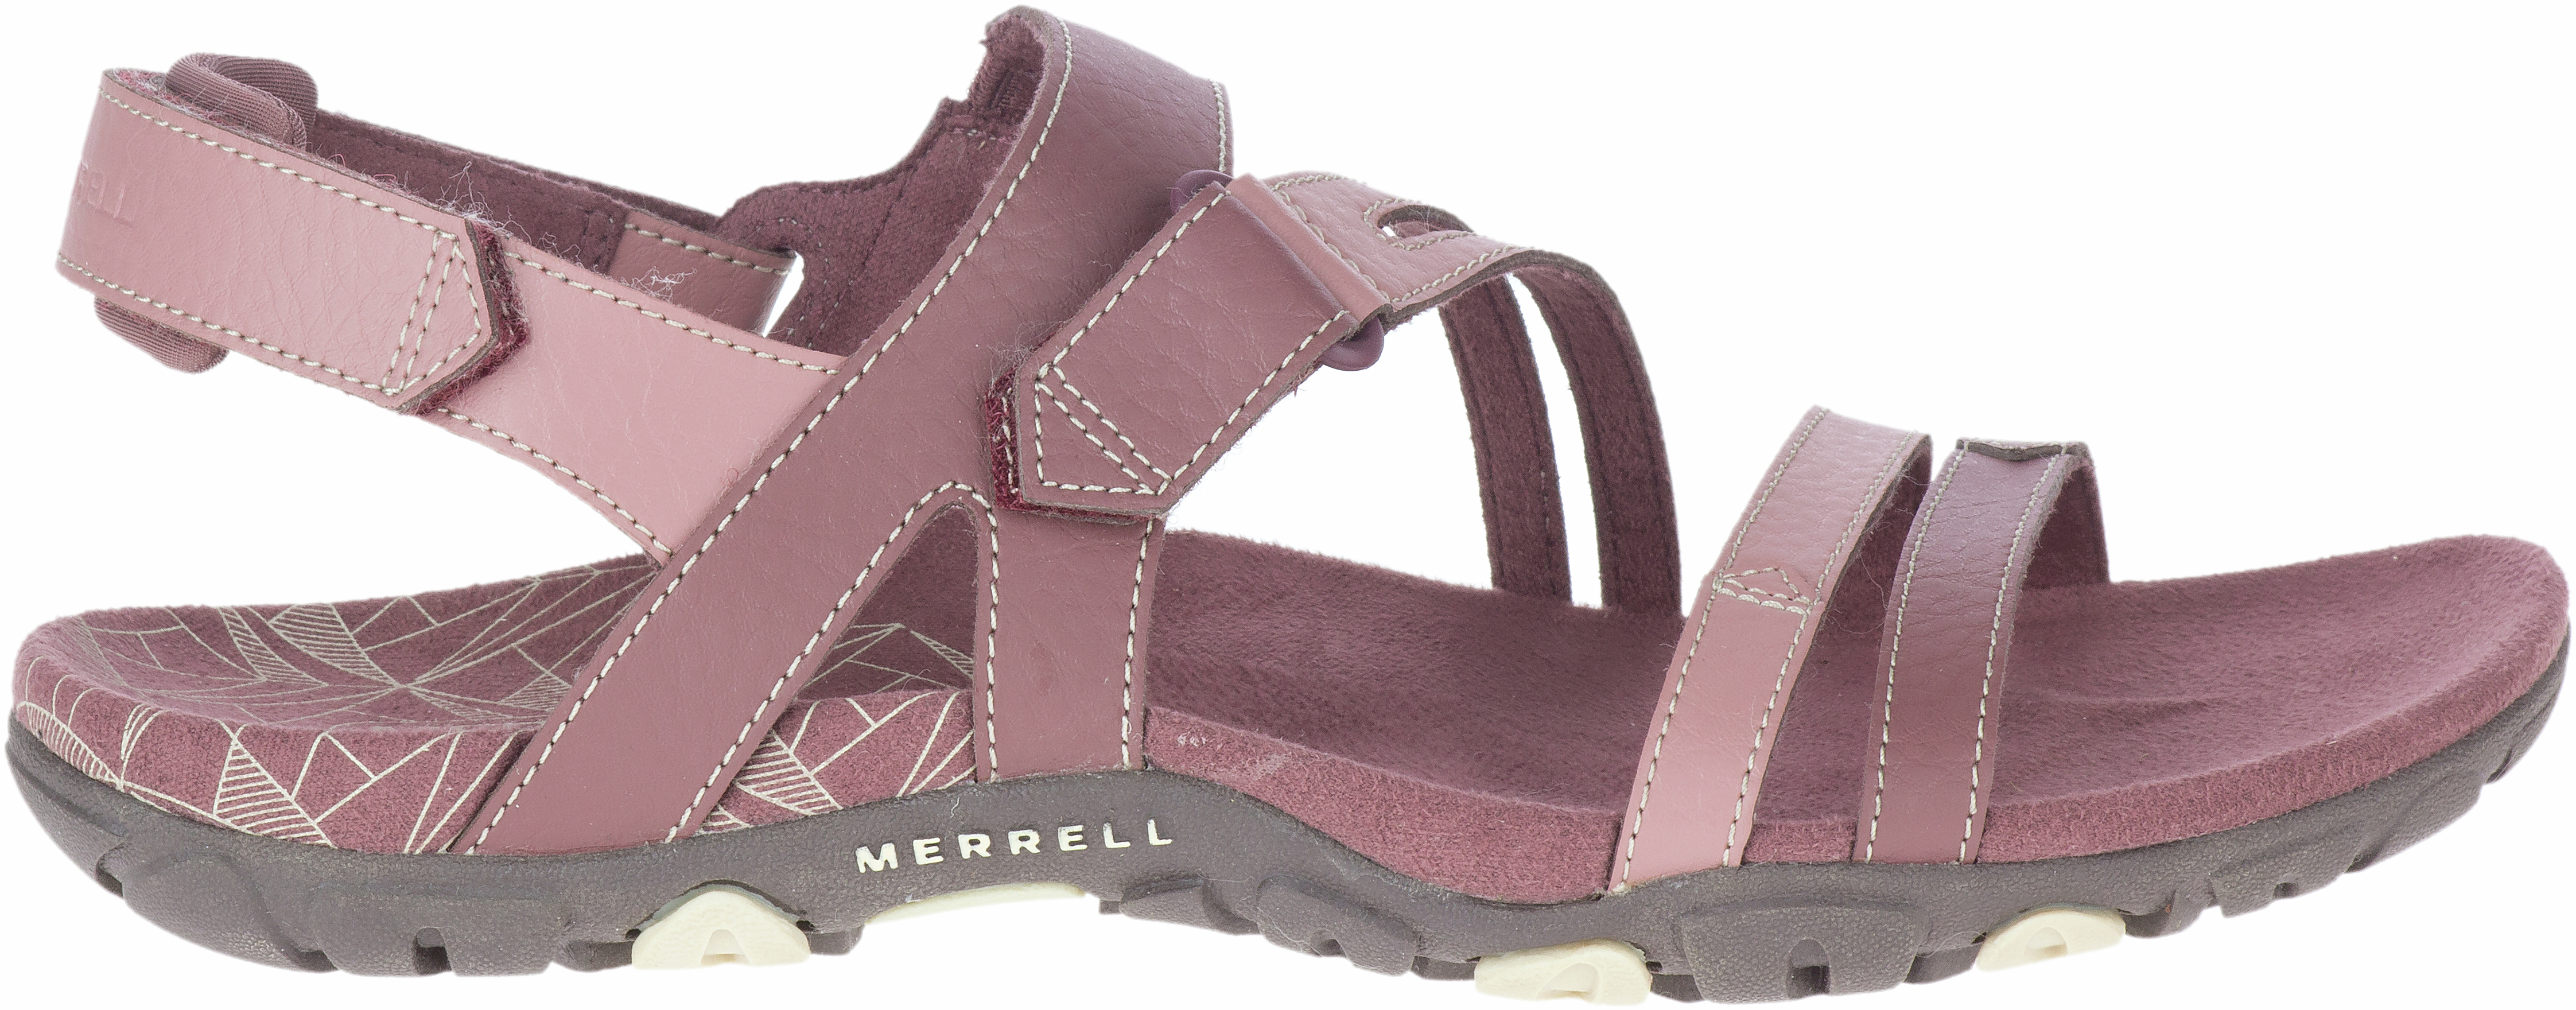 Merrell Women's Size 6 Sandspur Rose Leather Outdoor Casual Sandal  Espresso Red | eBay